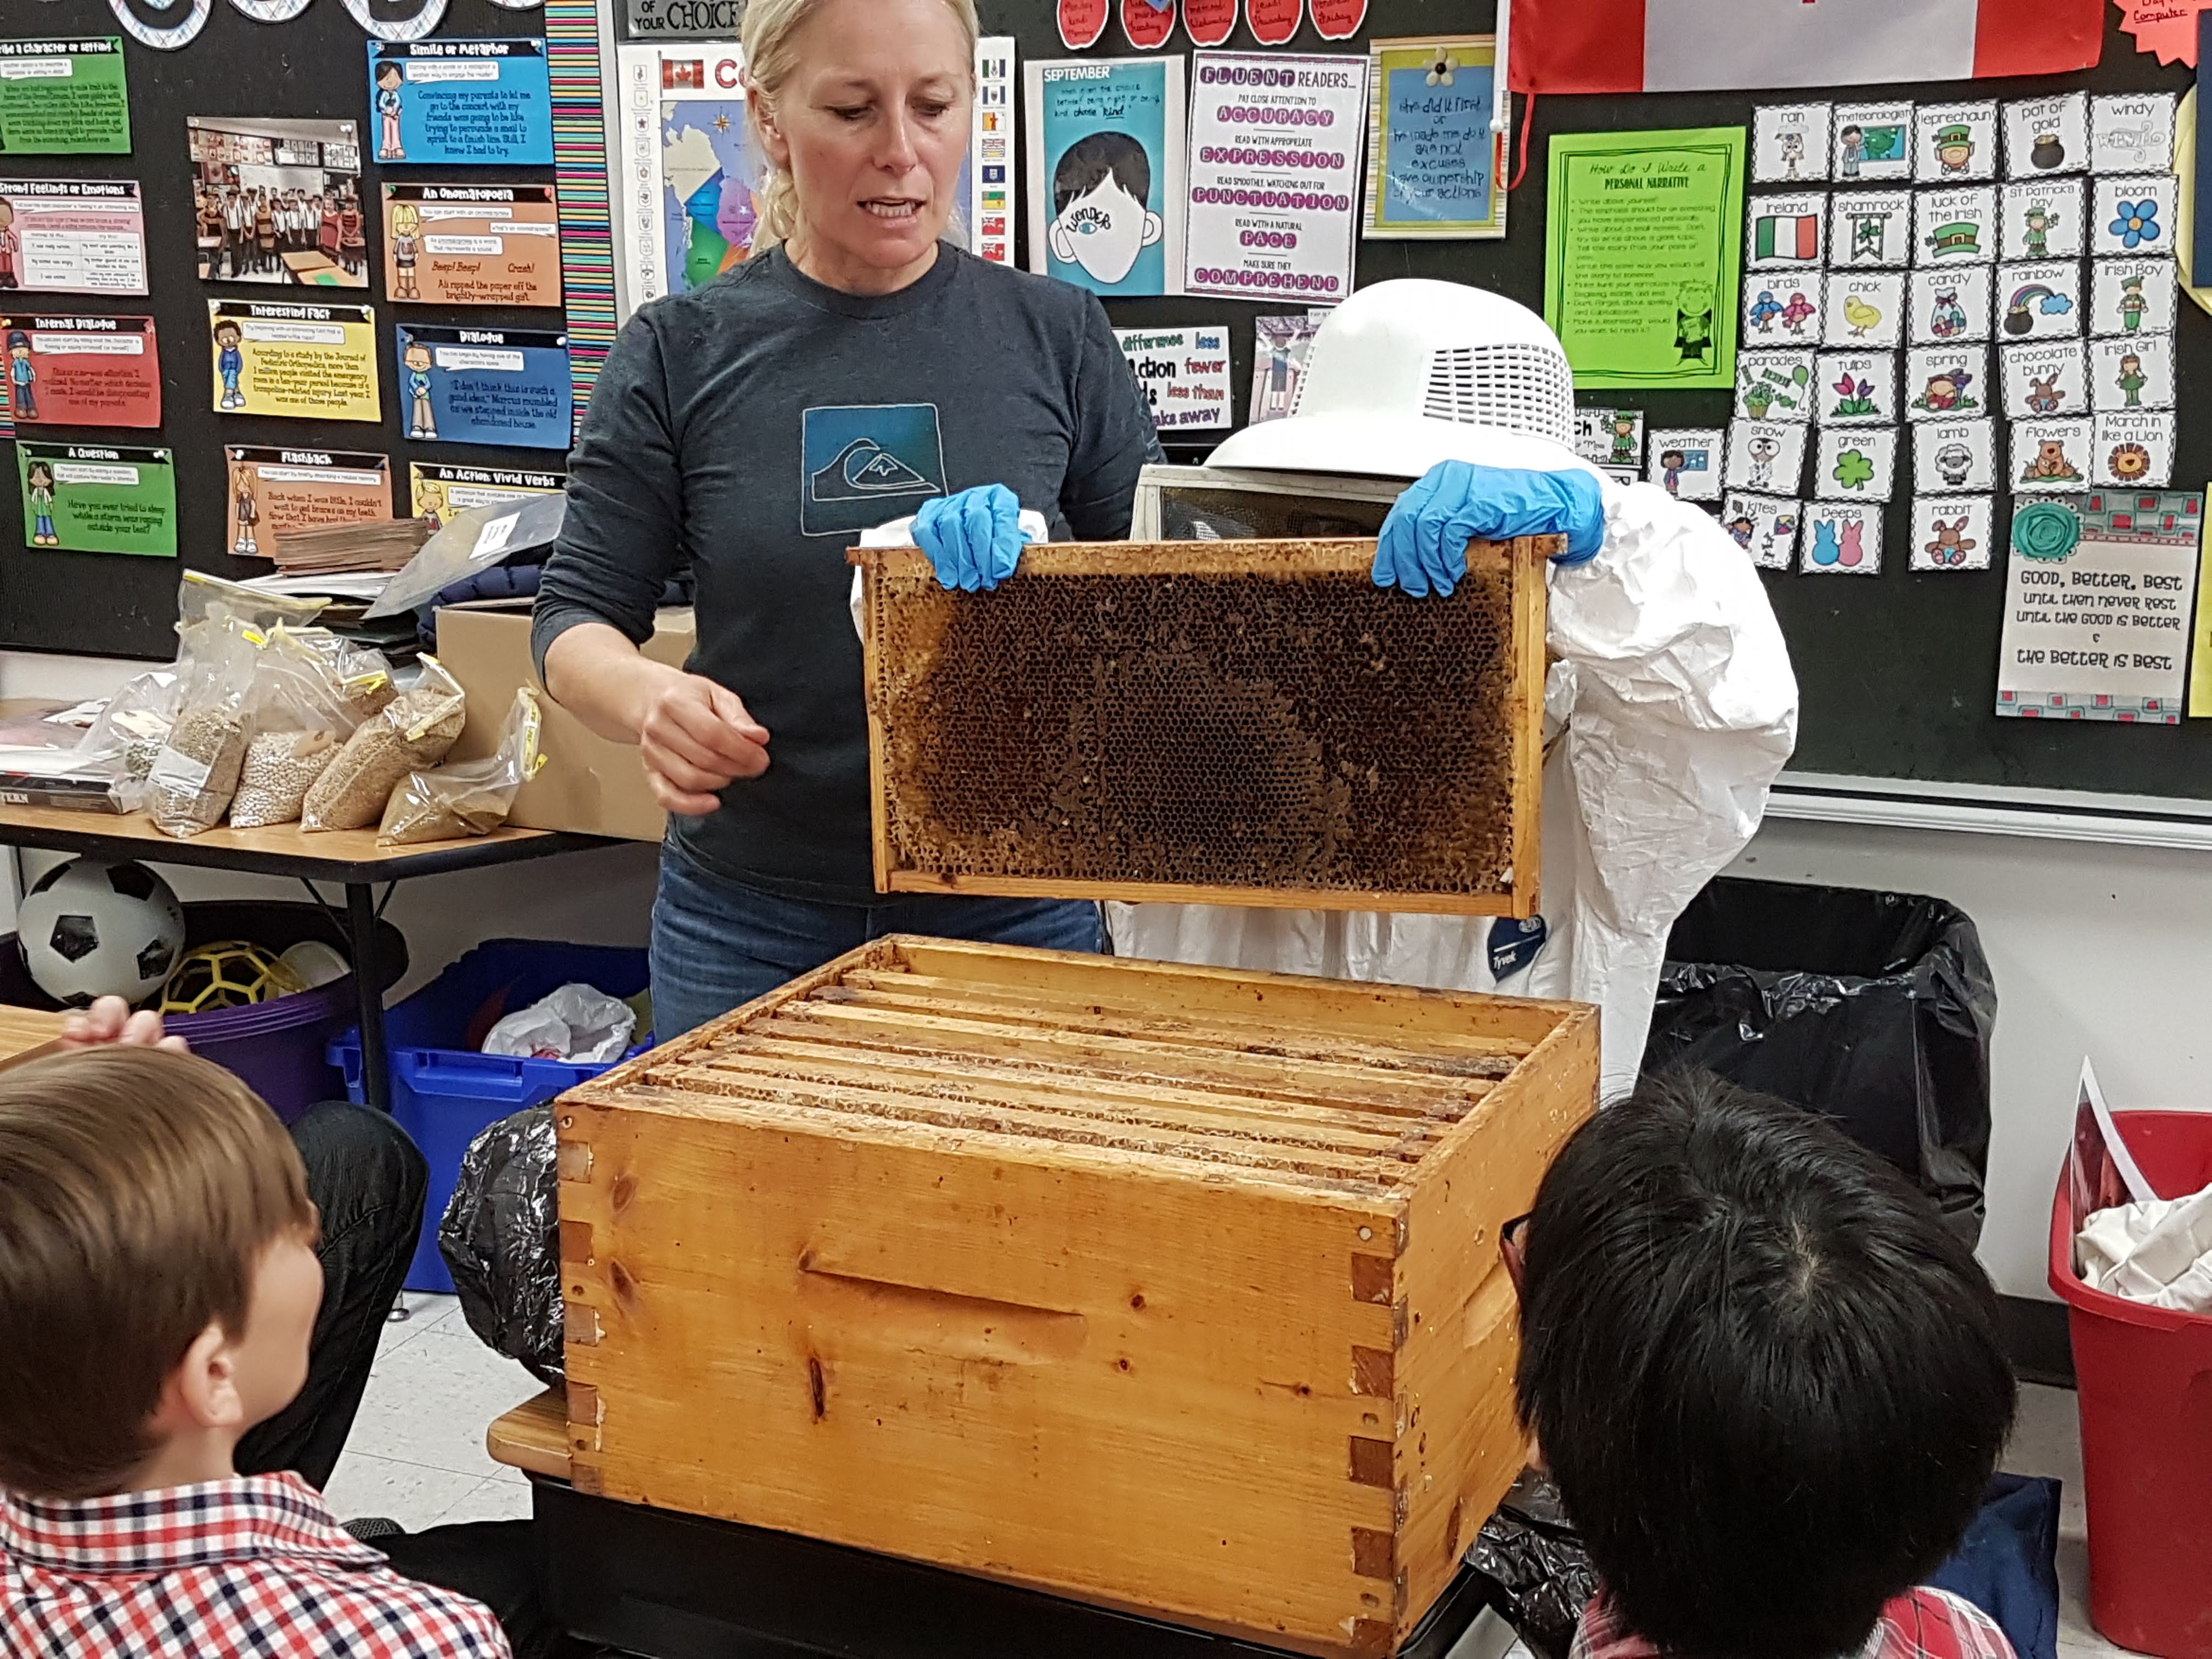 Dressed in a beekeeper suit, a student pulls dividers from a bee hive.